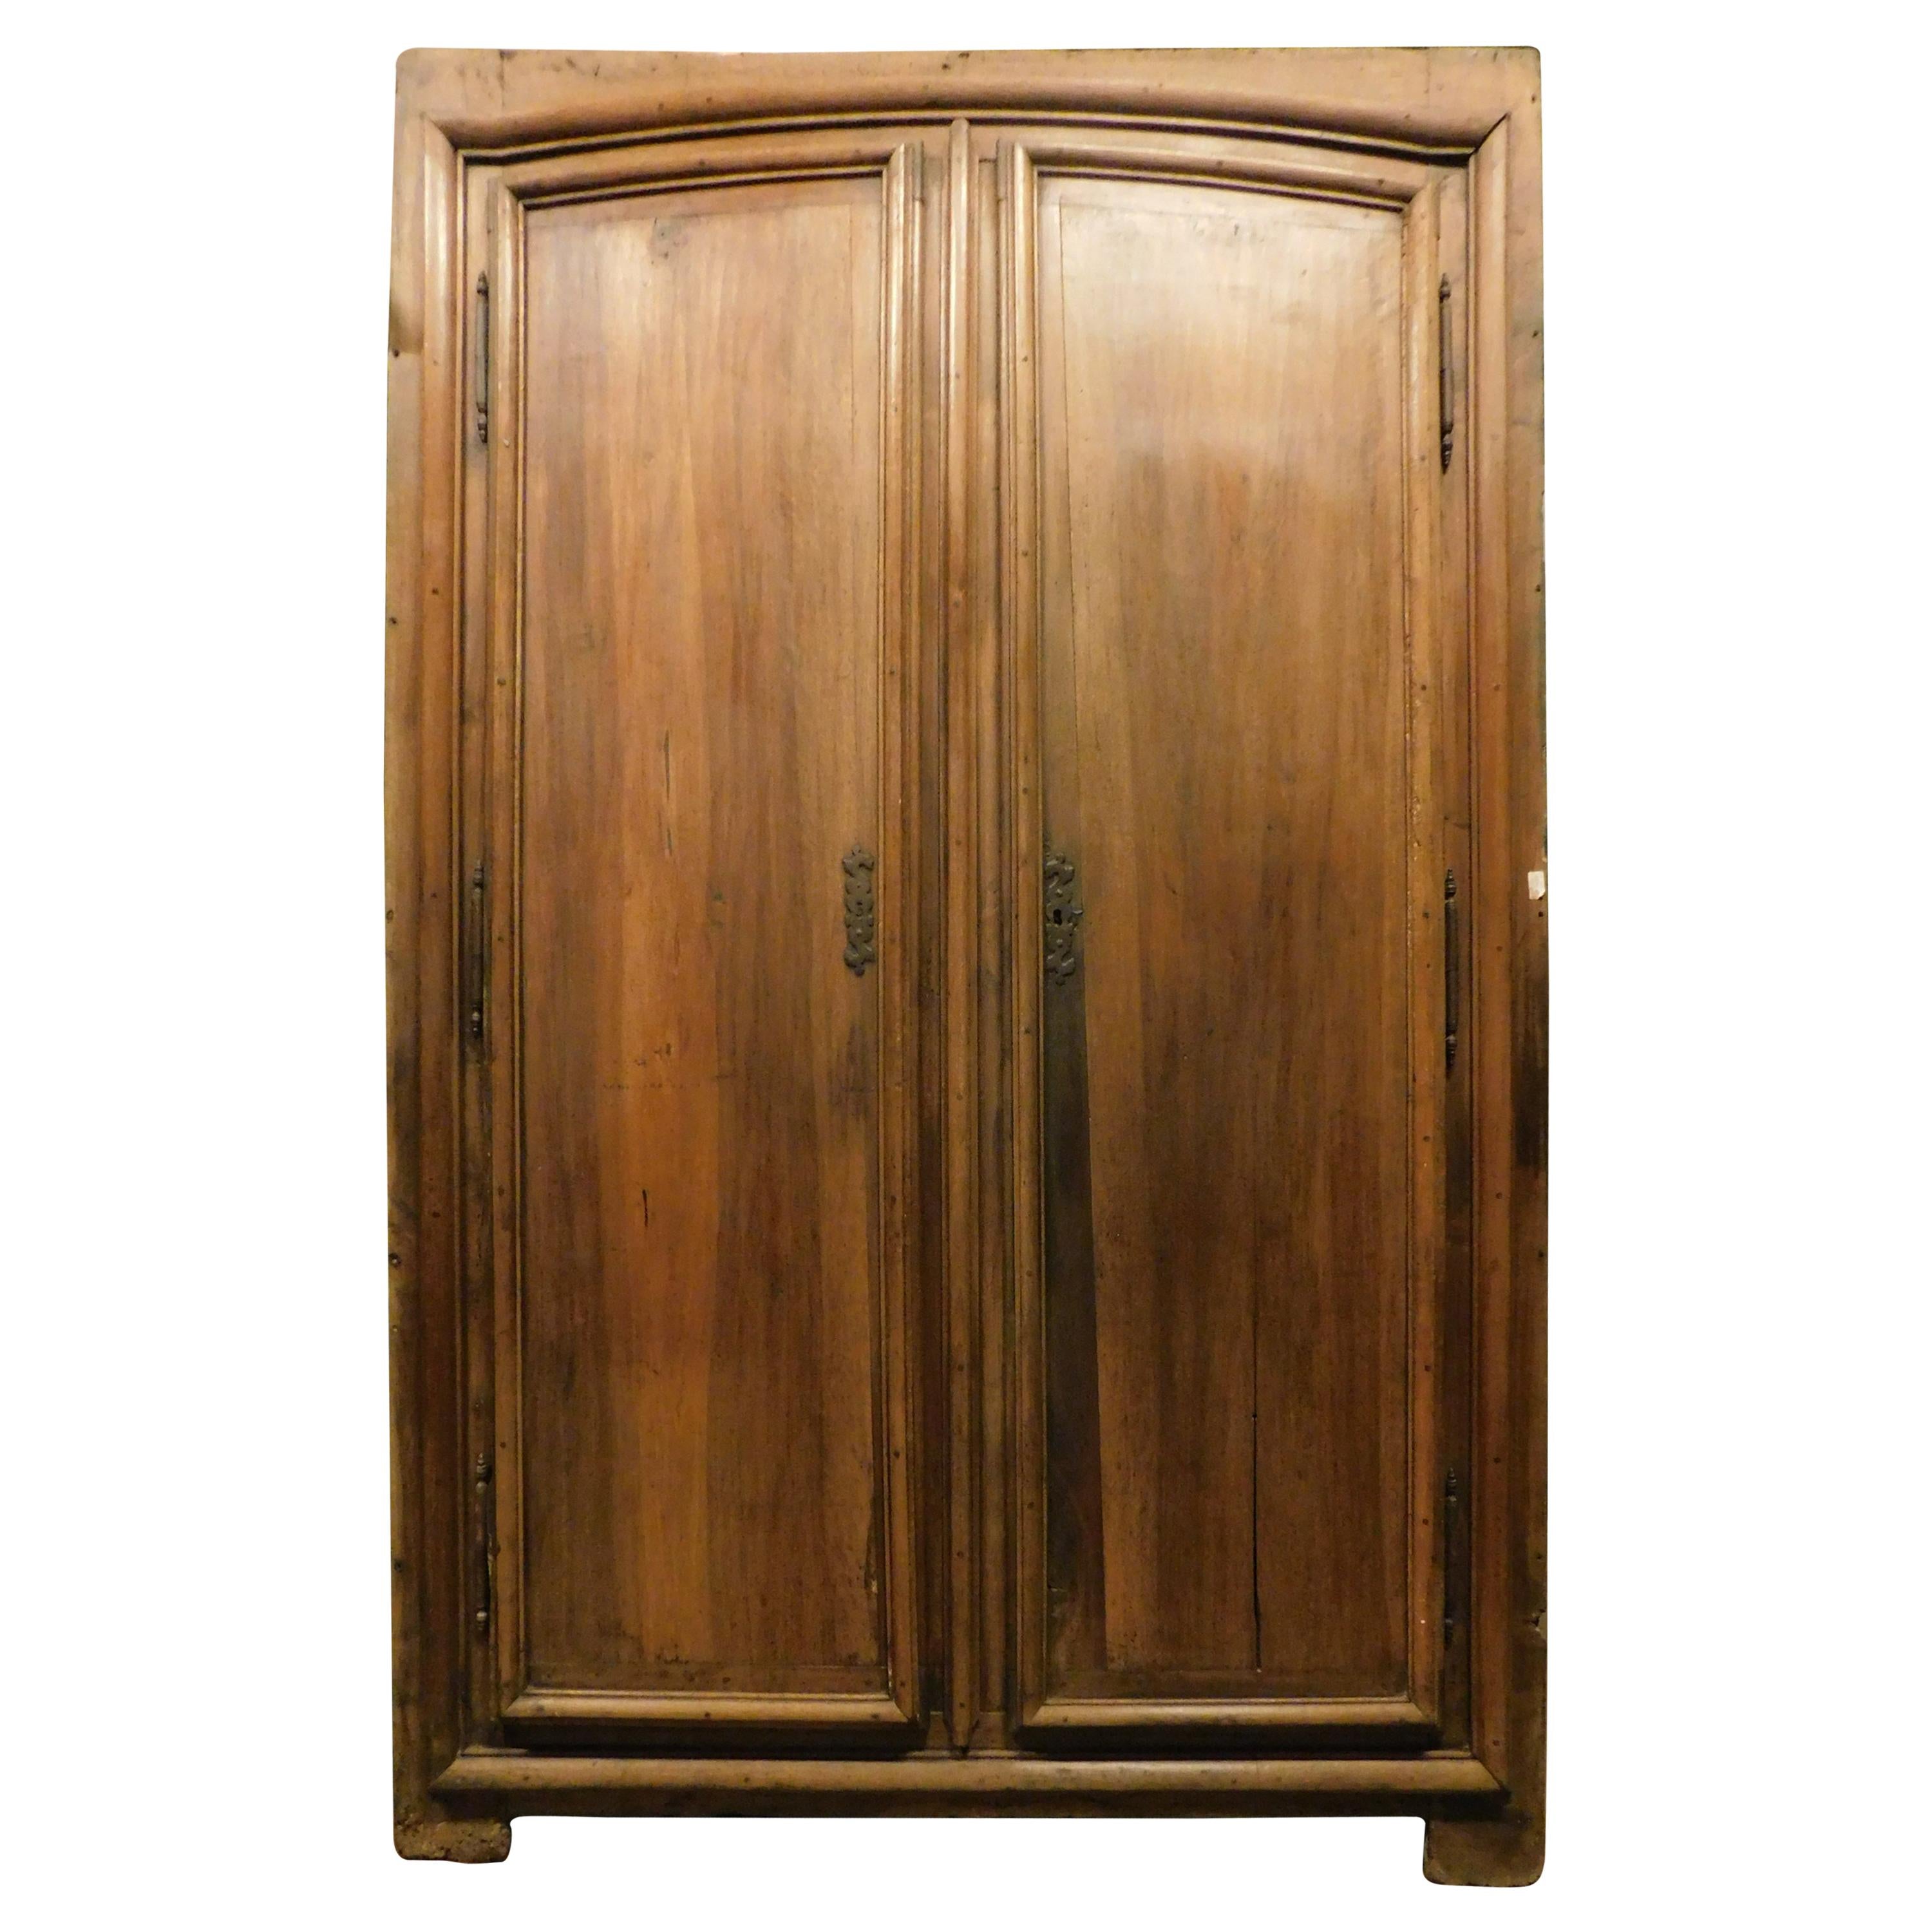 Antique Placard Door, Wall Cabinet in Brown Walnut Wood, 18th Century, Italy